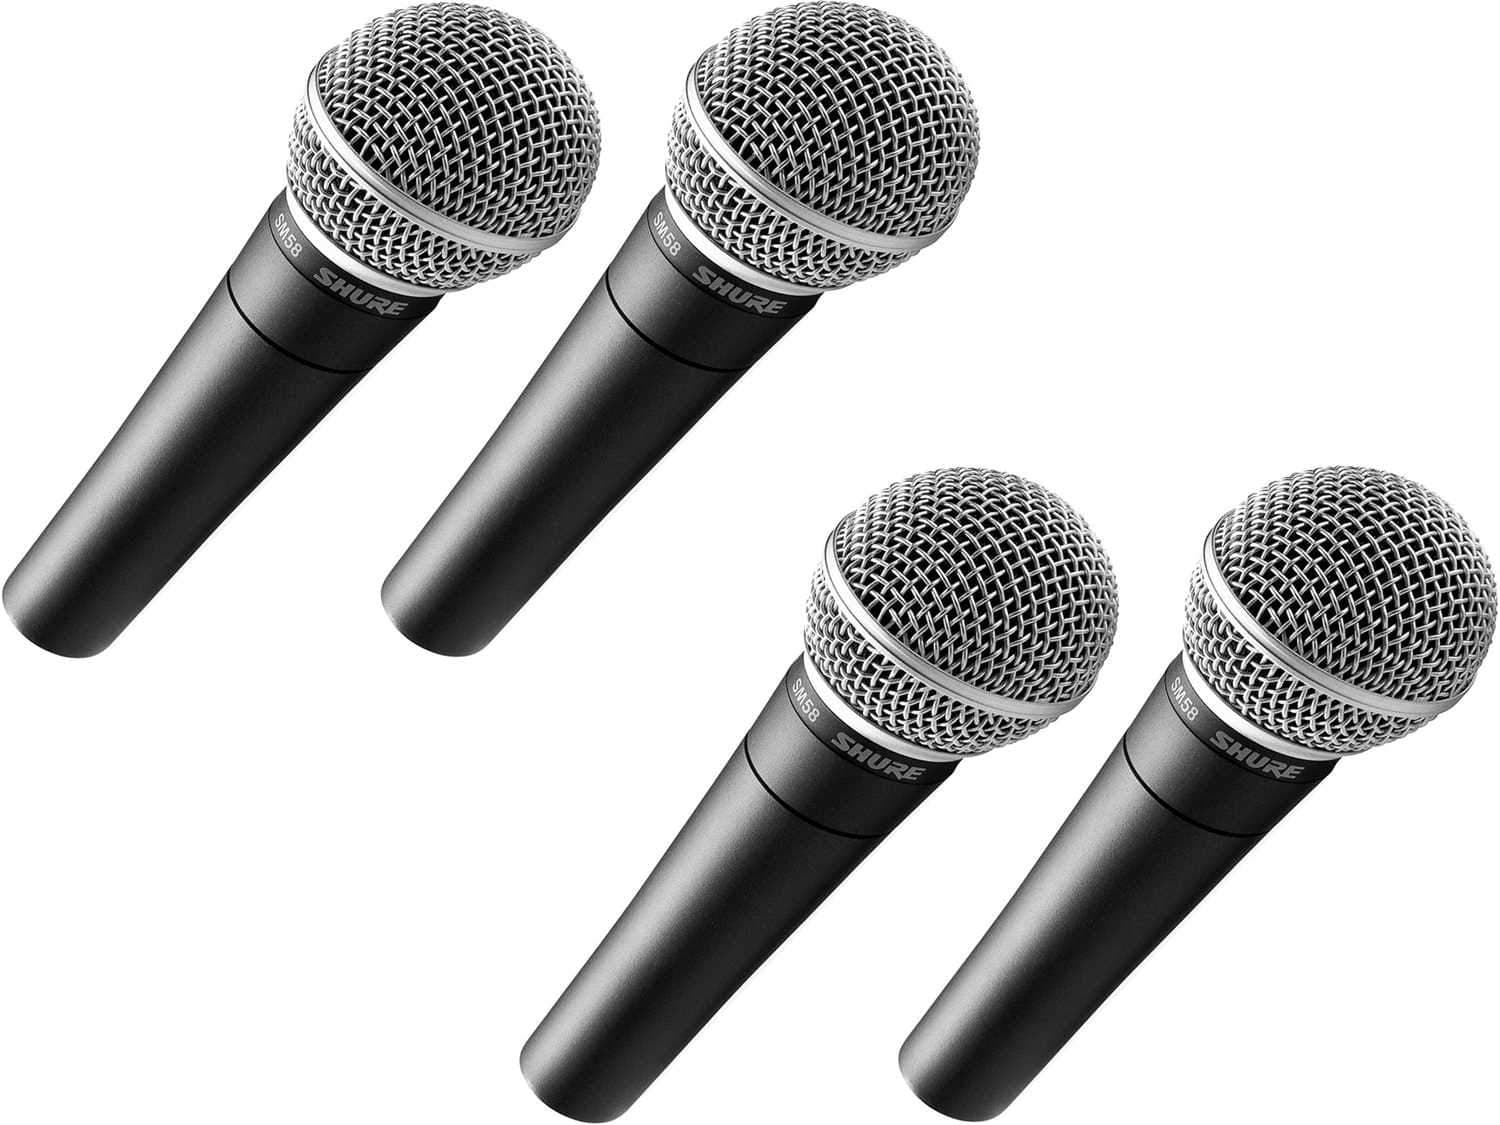 Shure SM58 Cardioid Dynamic Vocal Microphone 4-Pack